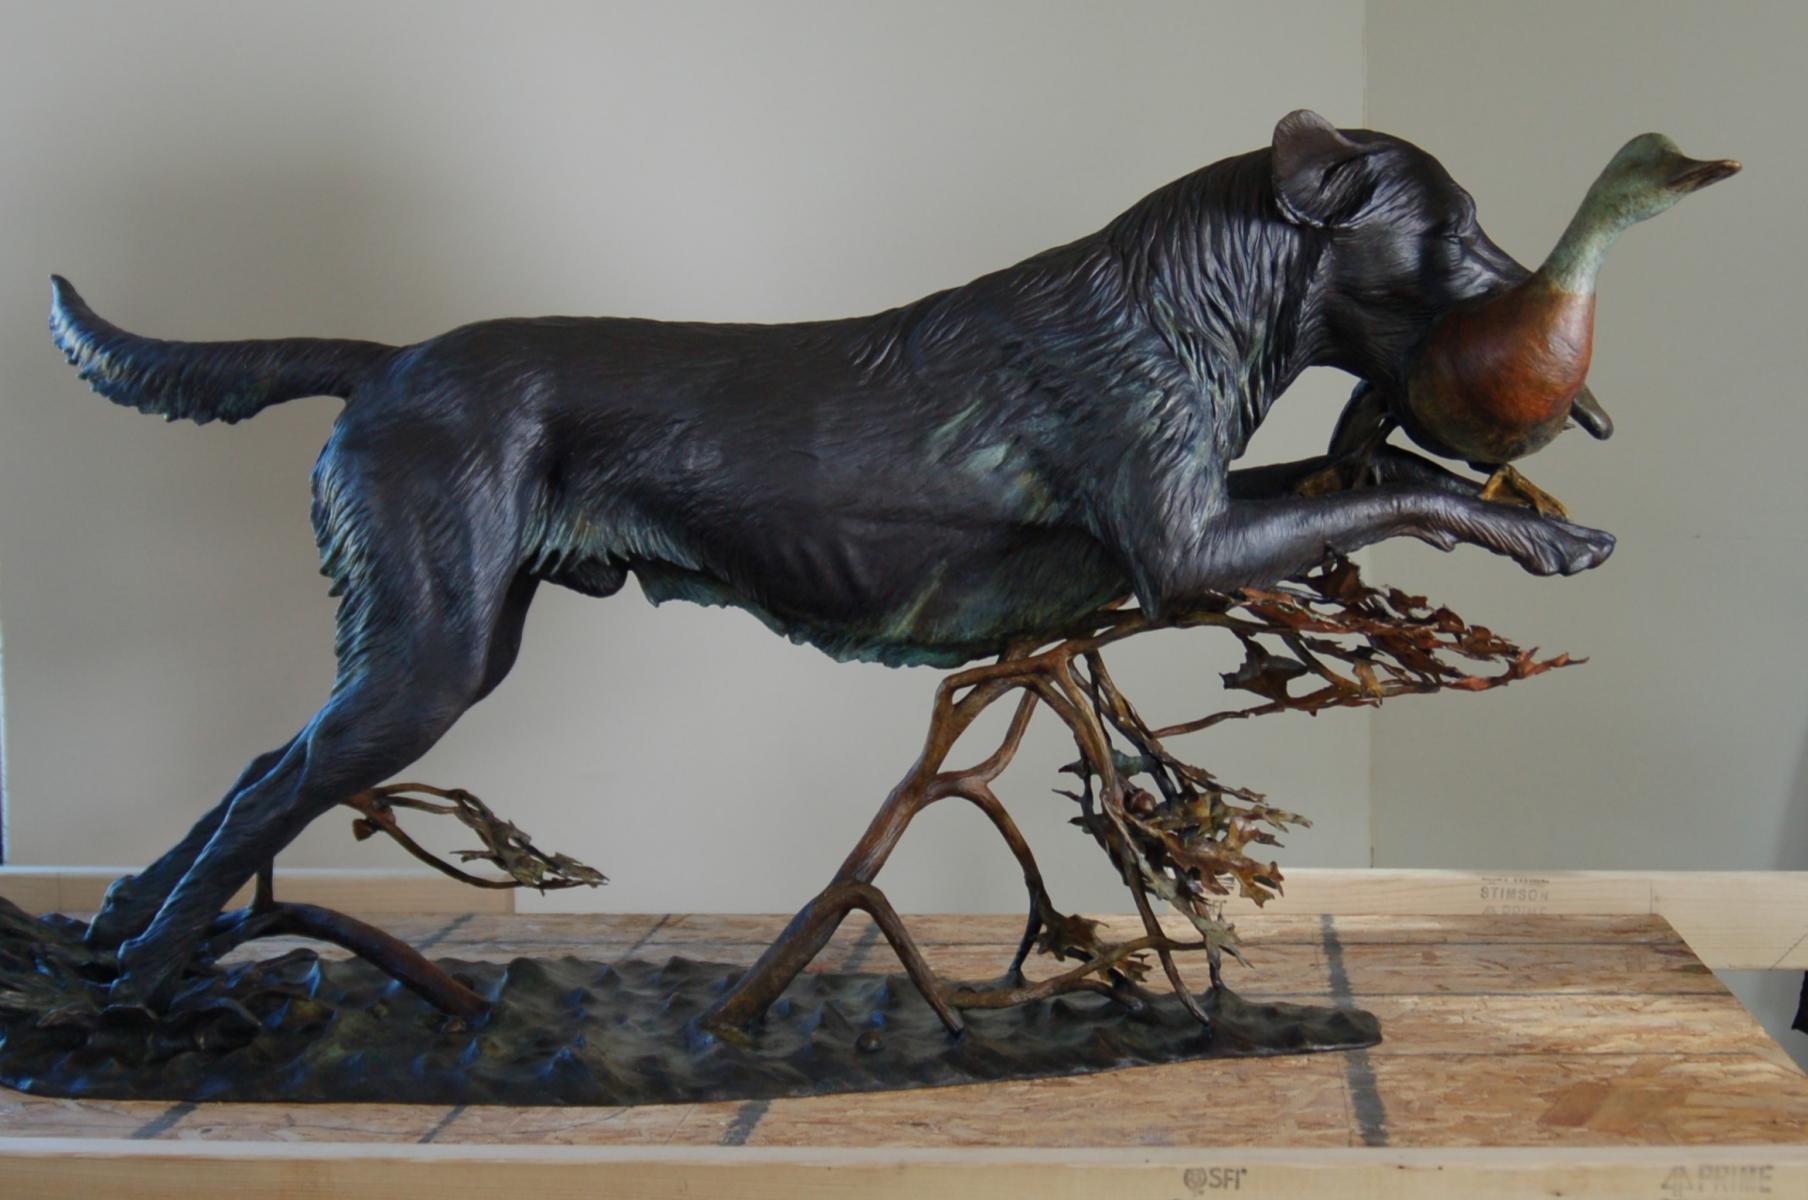 New Lab bronze edition with varied bases and leaves based on hunting locations. Edition of 5 : Dog Sculptures - Labradors : Ken Newman Sculptures | sculpture | bronze | wood | wildlifeart art | figurative sculpture | Idaho sculptor | animal art |